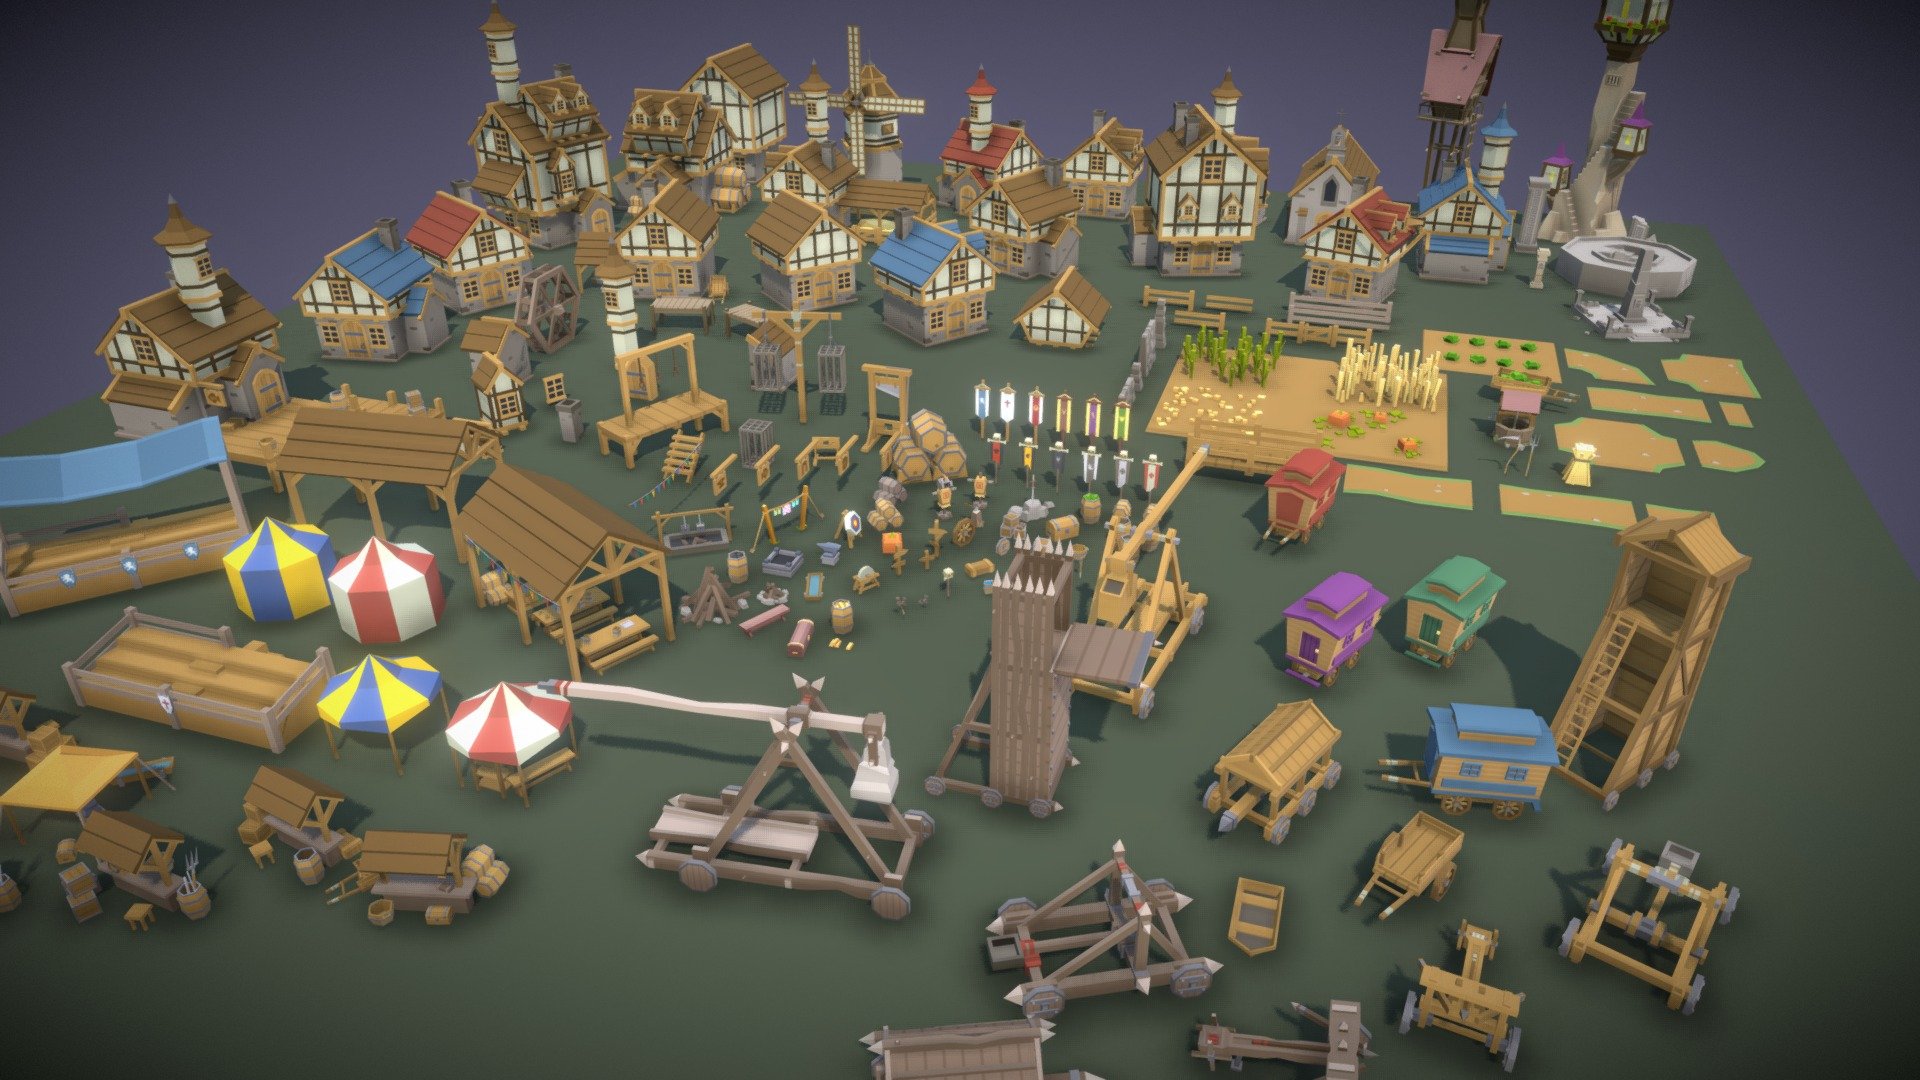 Simple Fantasy - Village. This awesome asset collection includes 170 assets for use in your project.

Our Simple series has a cuby low poly style look 3d model